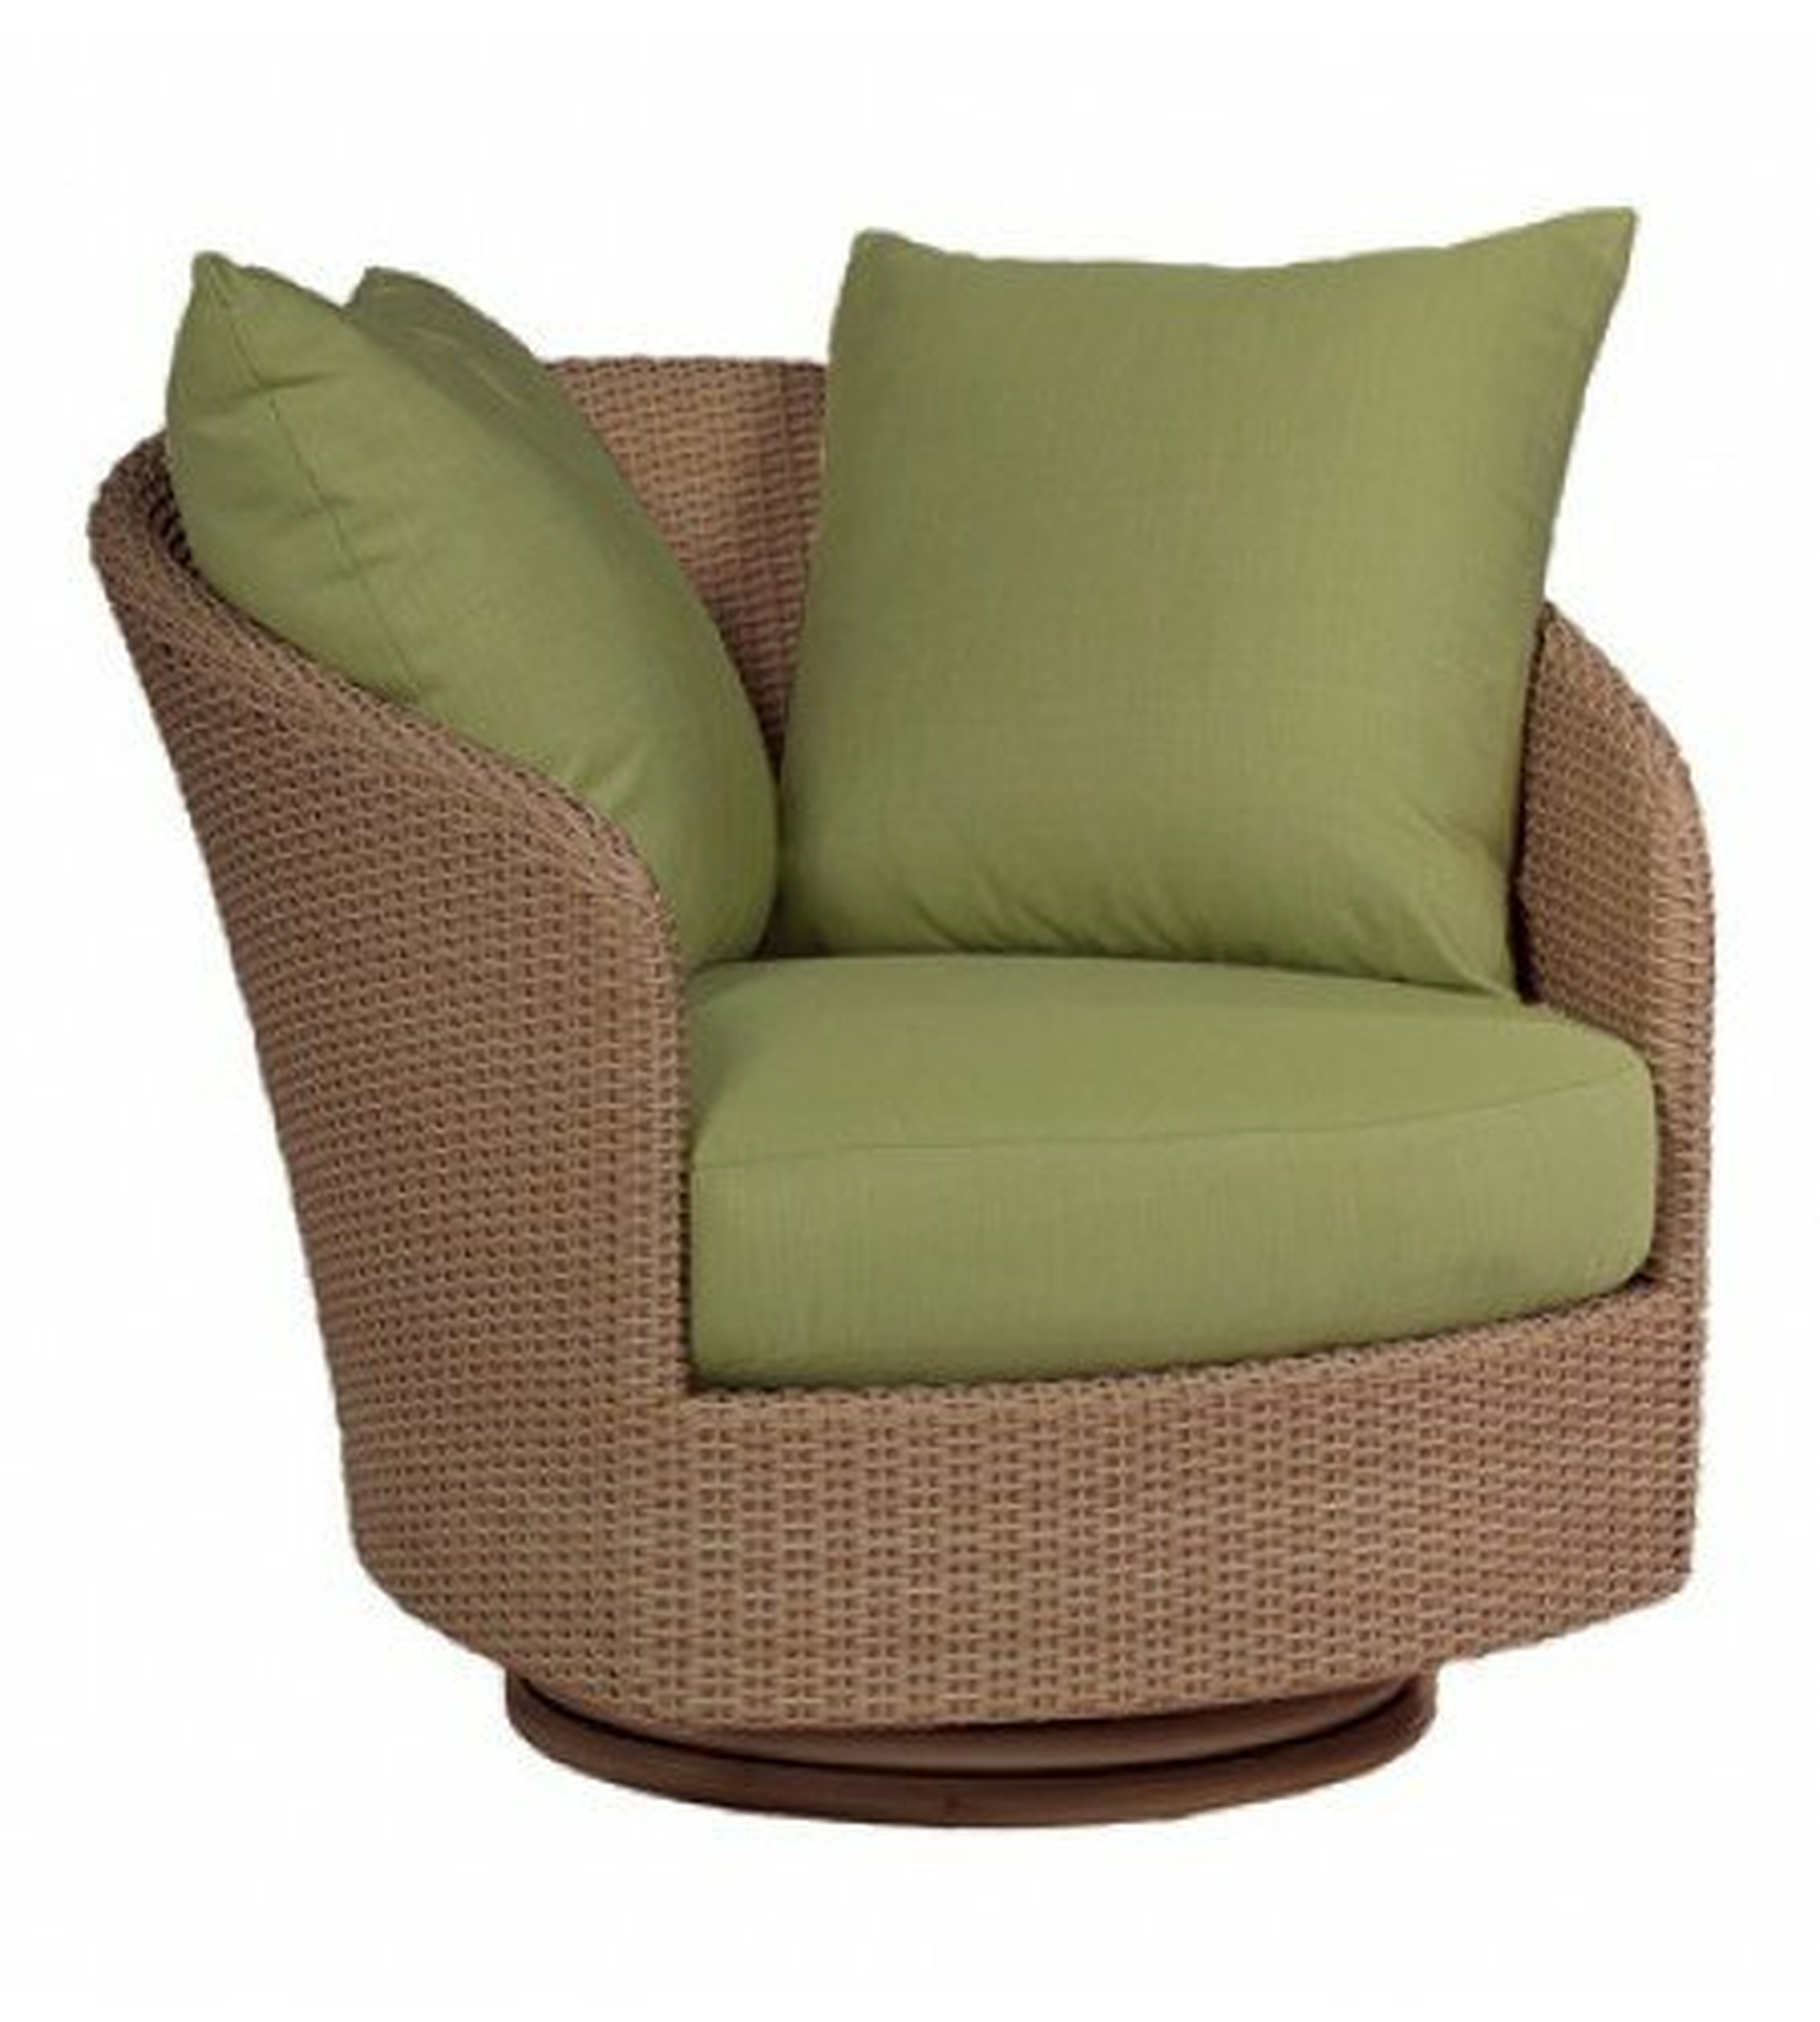 Oasis Swivel Patio Chair with Cushions - Canvas Heather Beige **color not pictured** - Perigold